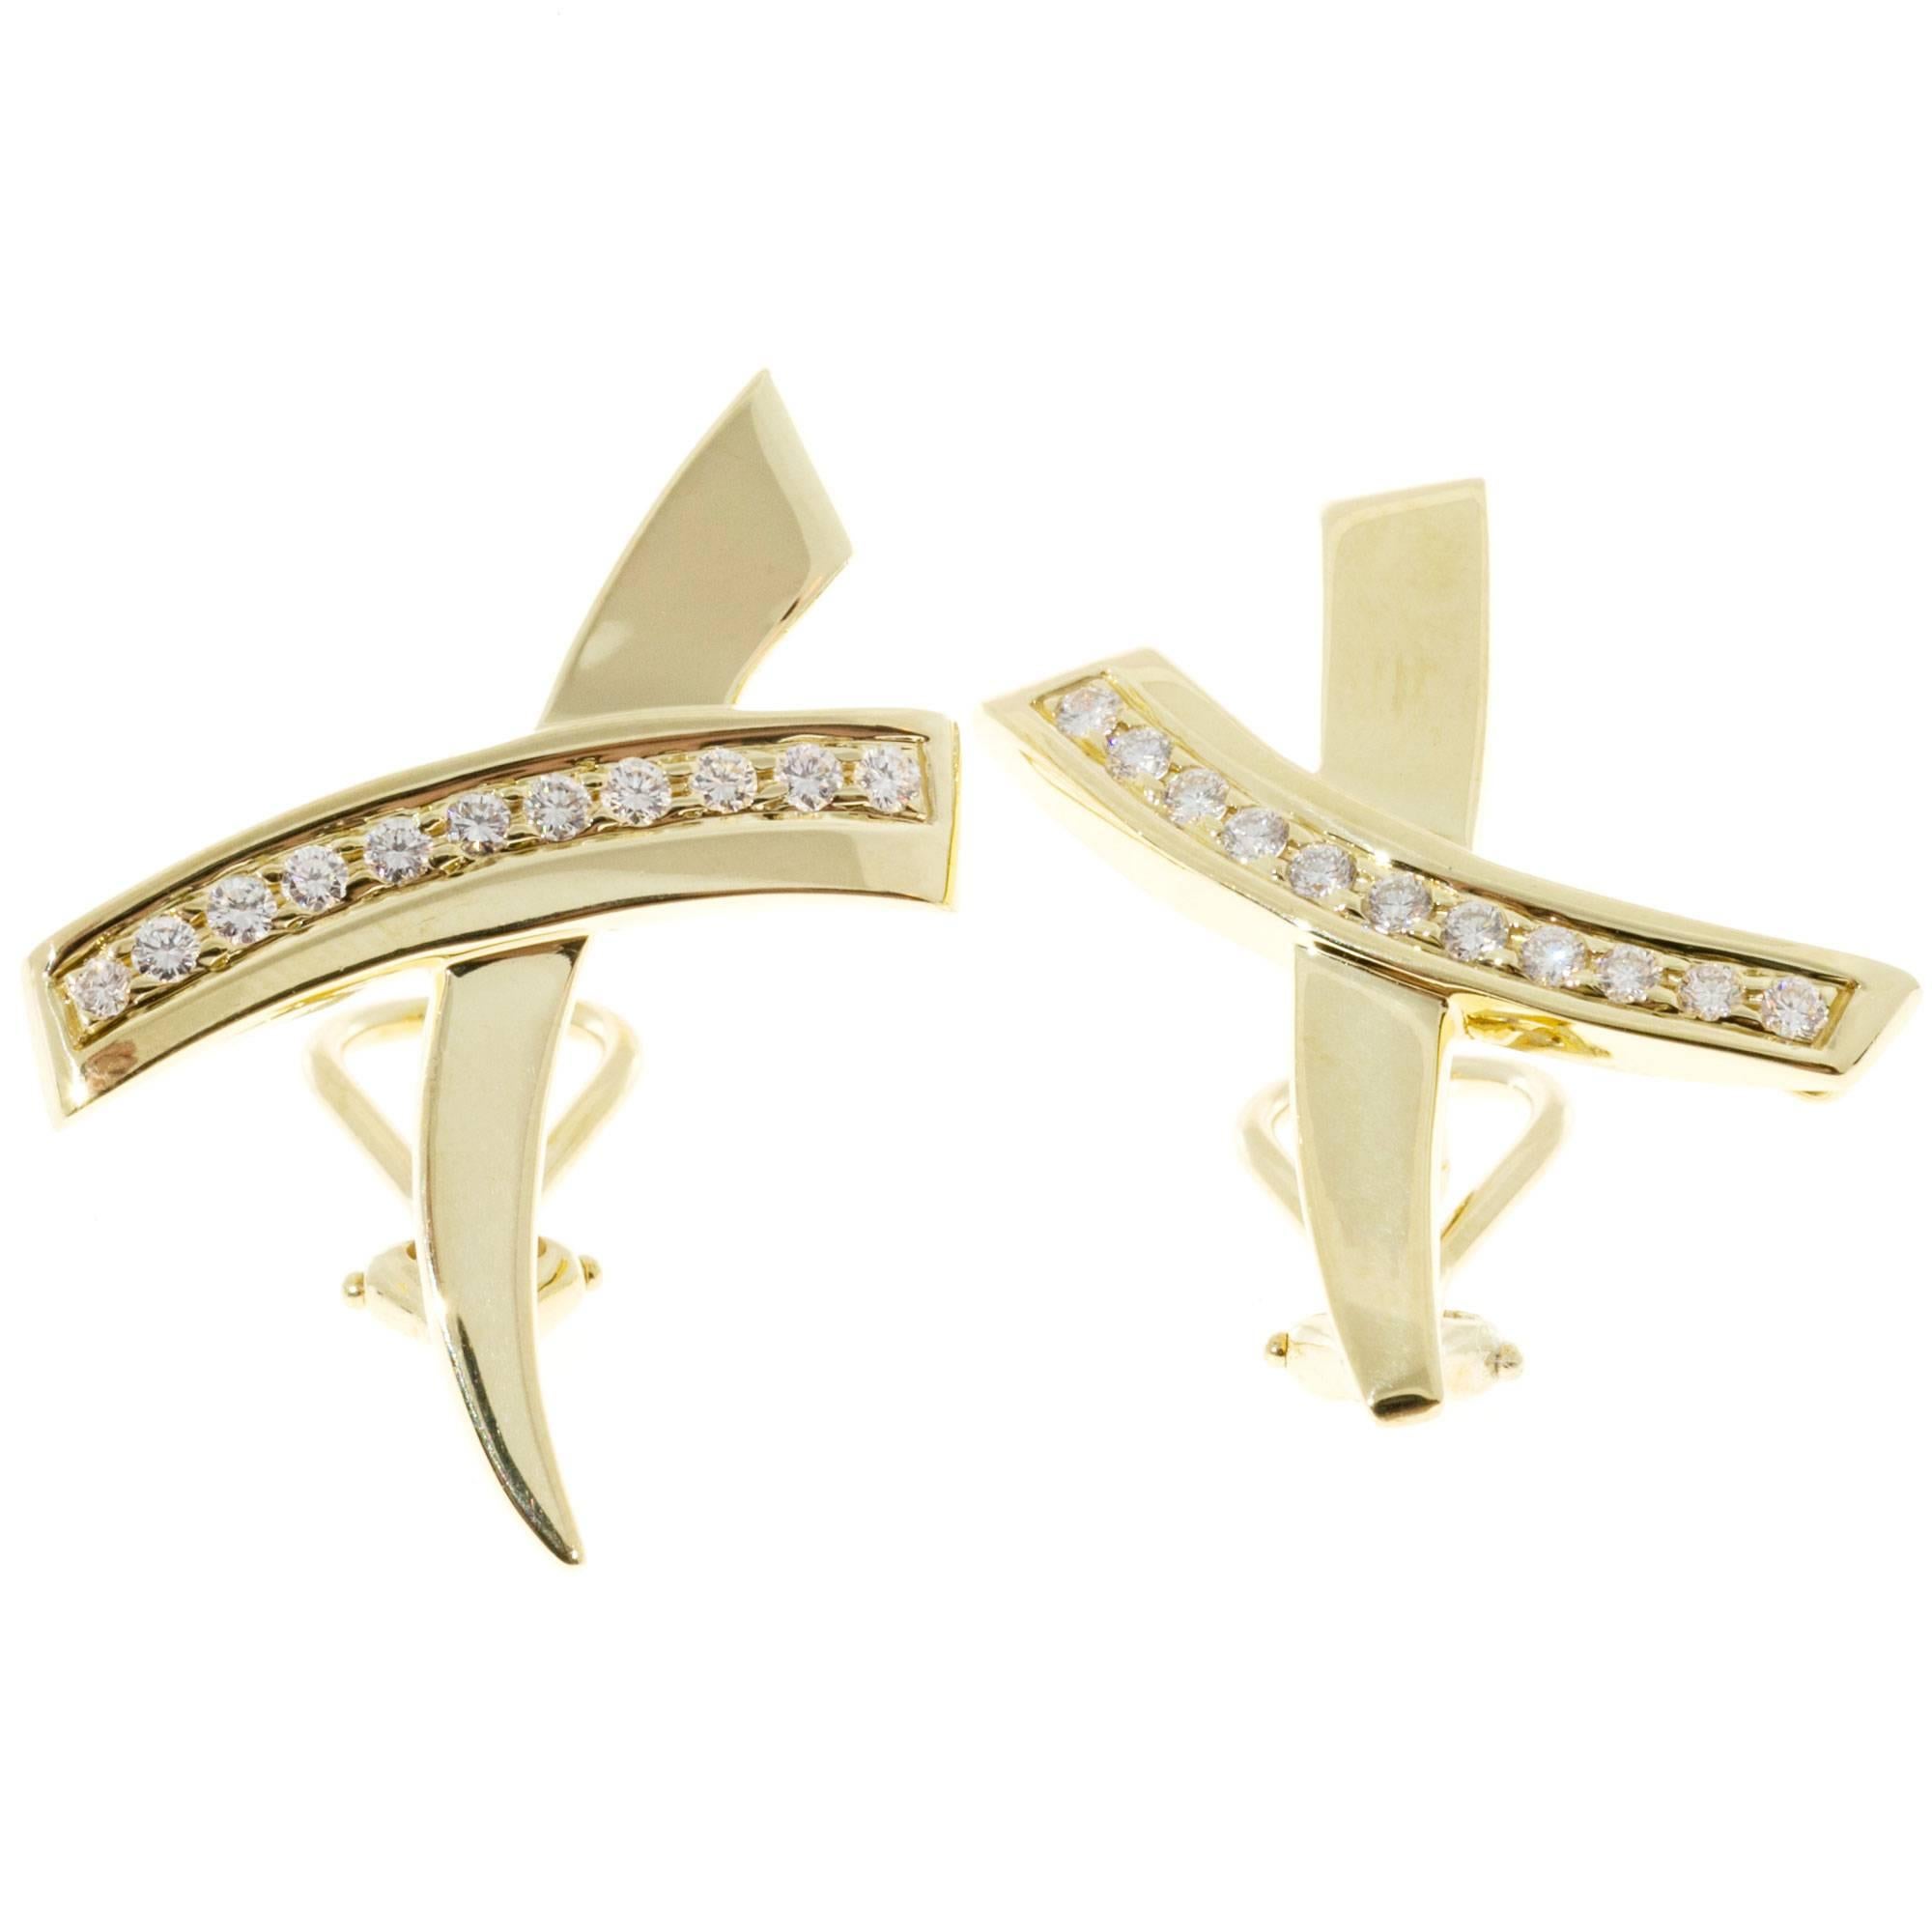 Paloma Picasso “X” design diamond earrings for Tiffany & Co from the Grafitti collection. Clip and post.

22 round diamonds approx. total weight .44cts, F, VS
18k yellow gold
Tested: 18k
Stamped: 750
11.9 grams
Hallmark: Tiffany & Co Paloma